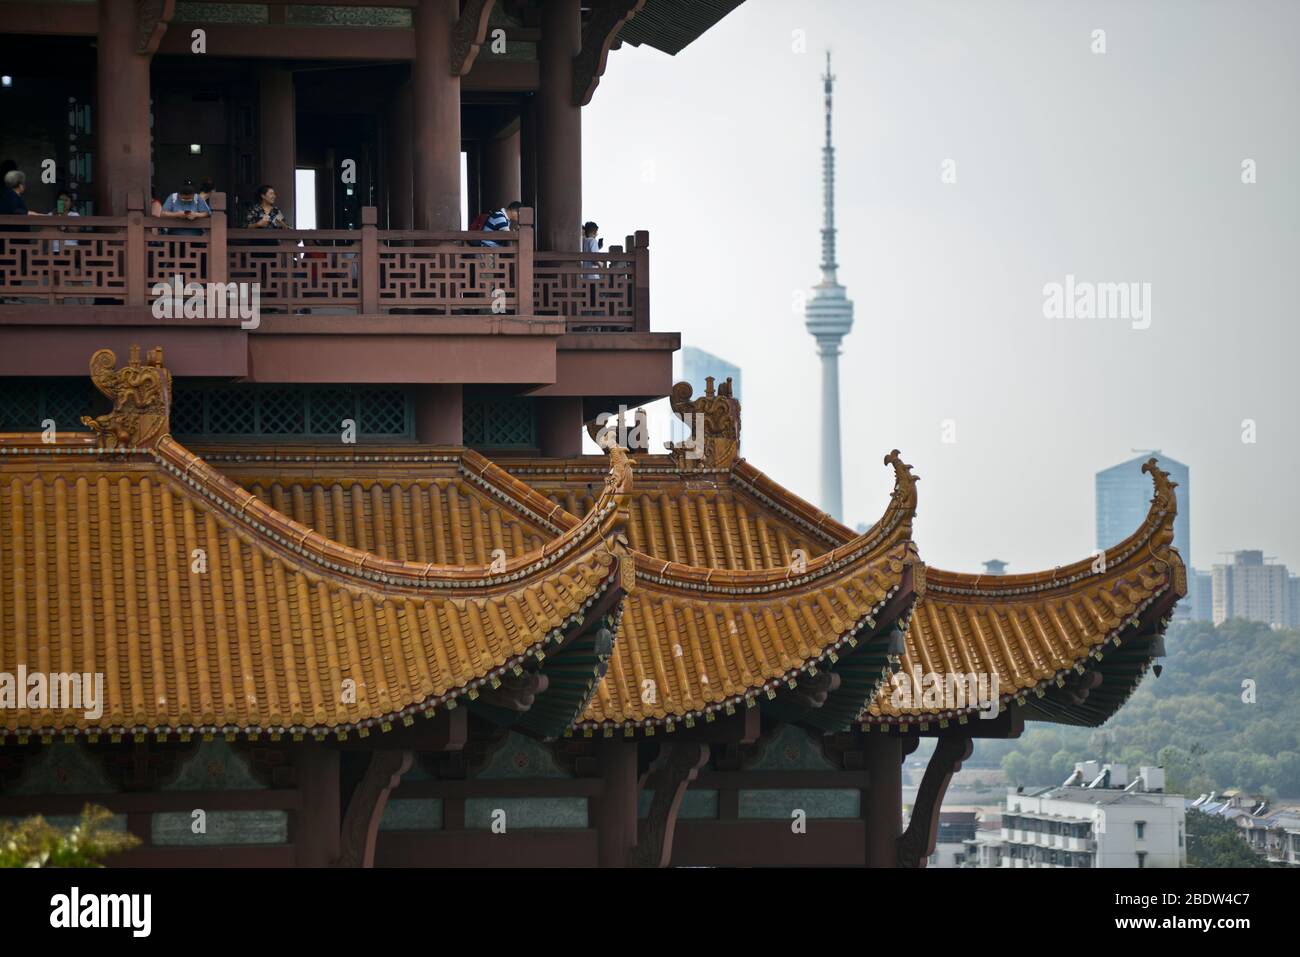 Yellow Crane Tower: details on the architecture with the TV Tower on the background. Wuhan, China Stock Photo